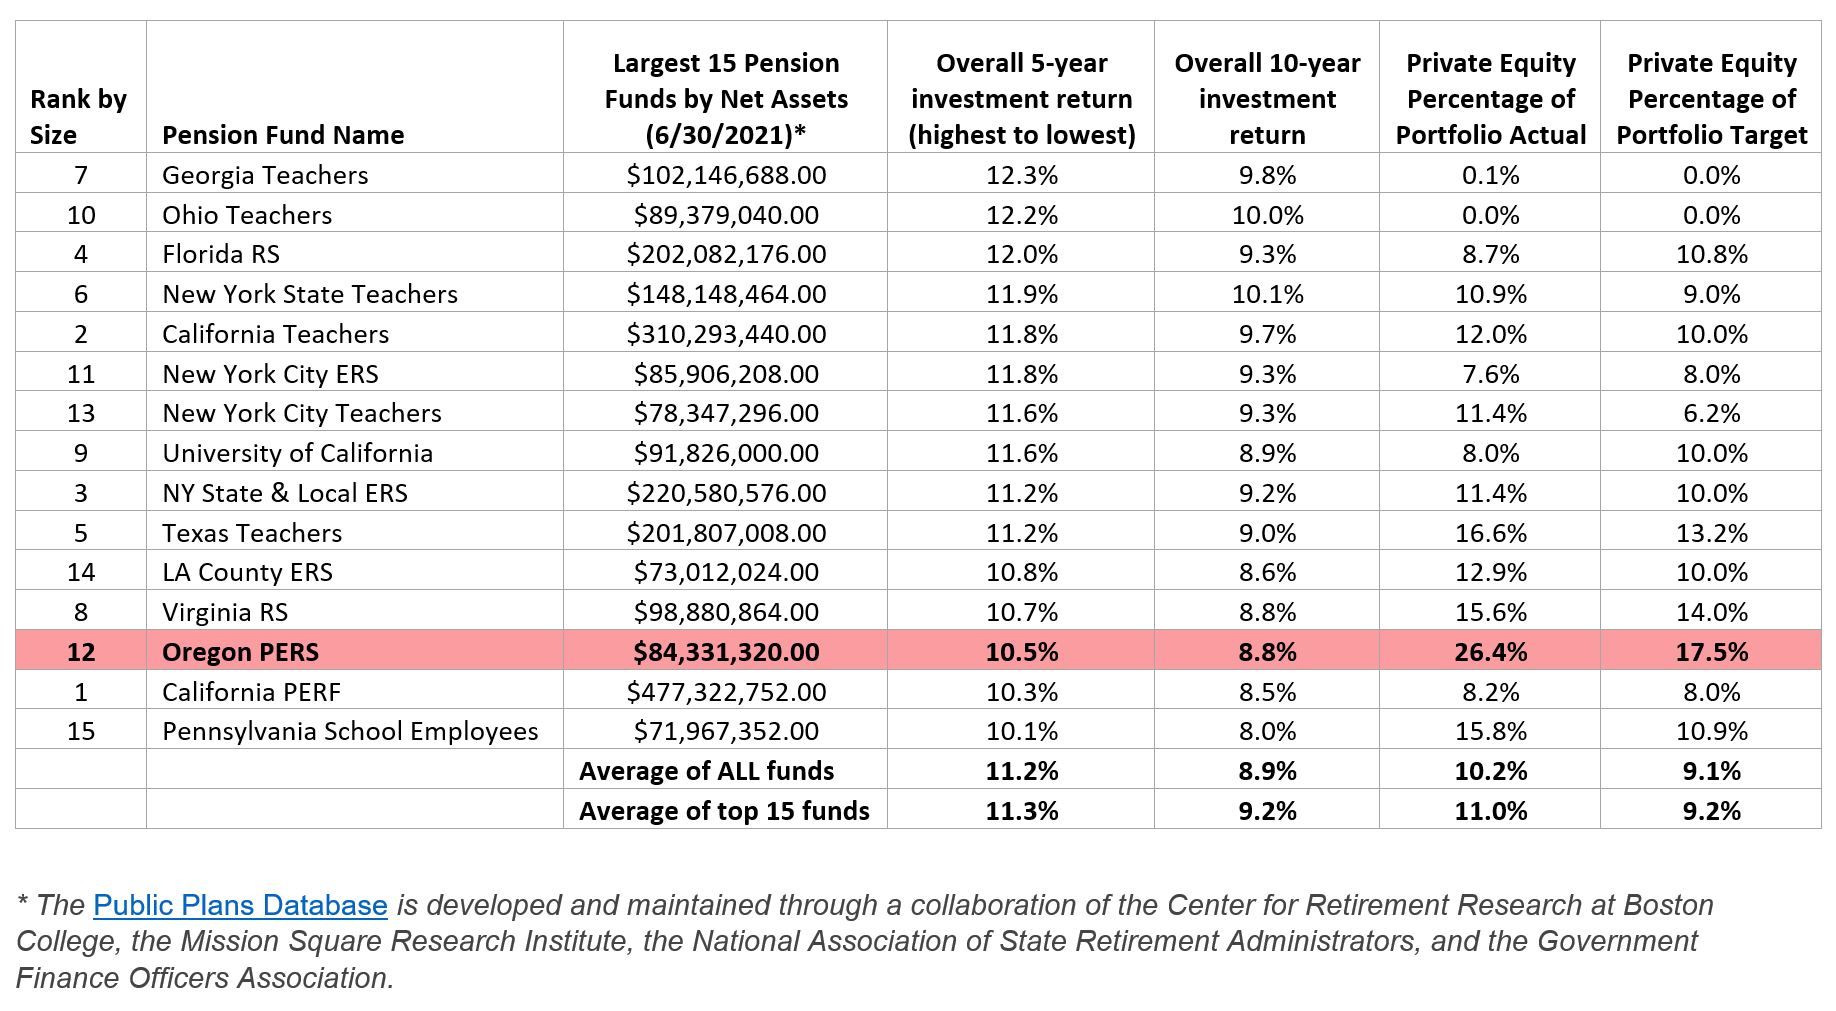 Comparison of Top 12 Public Pension Funds private equity holdings and 10 year returns